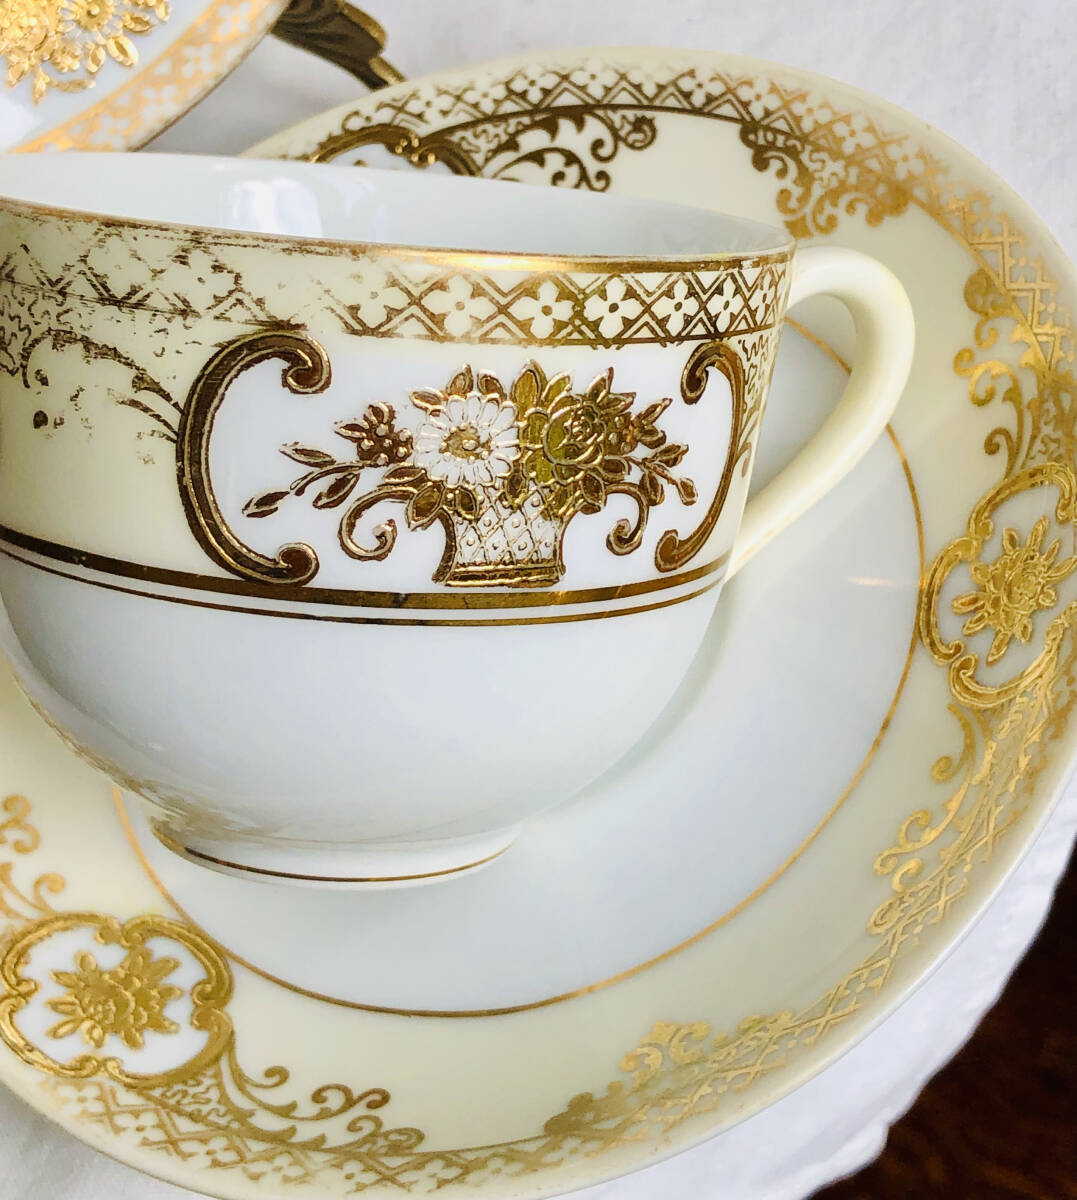 1920 period Old Noritake maru ki seal peak up gold paint Gold basket ob flower pattern cup and saucer Trio A